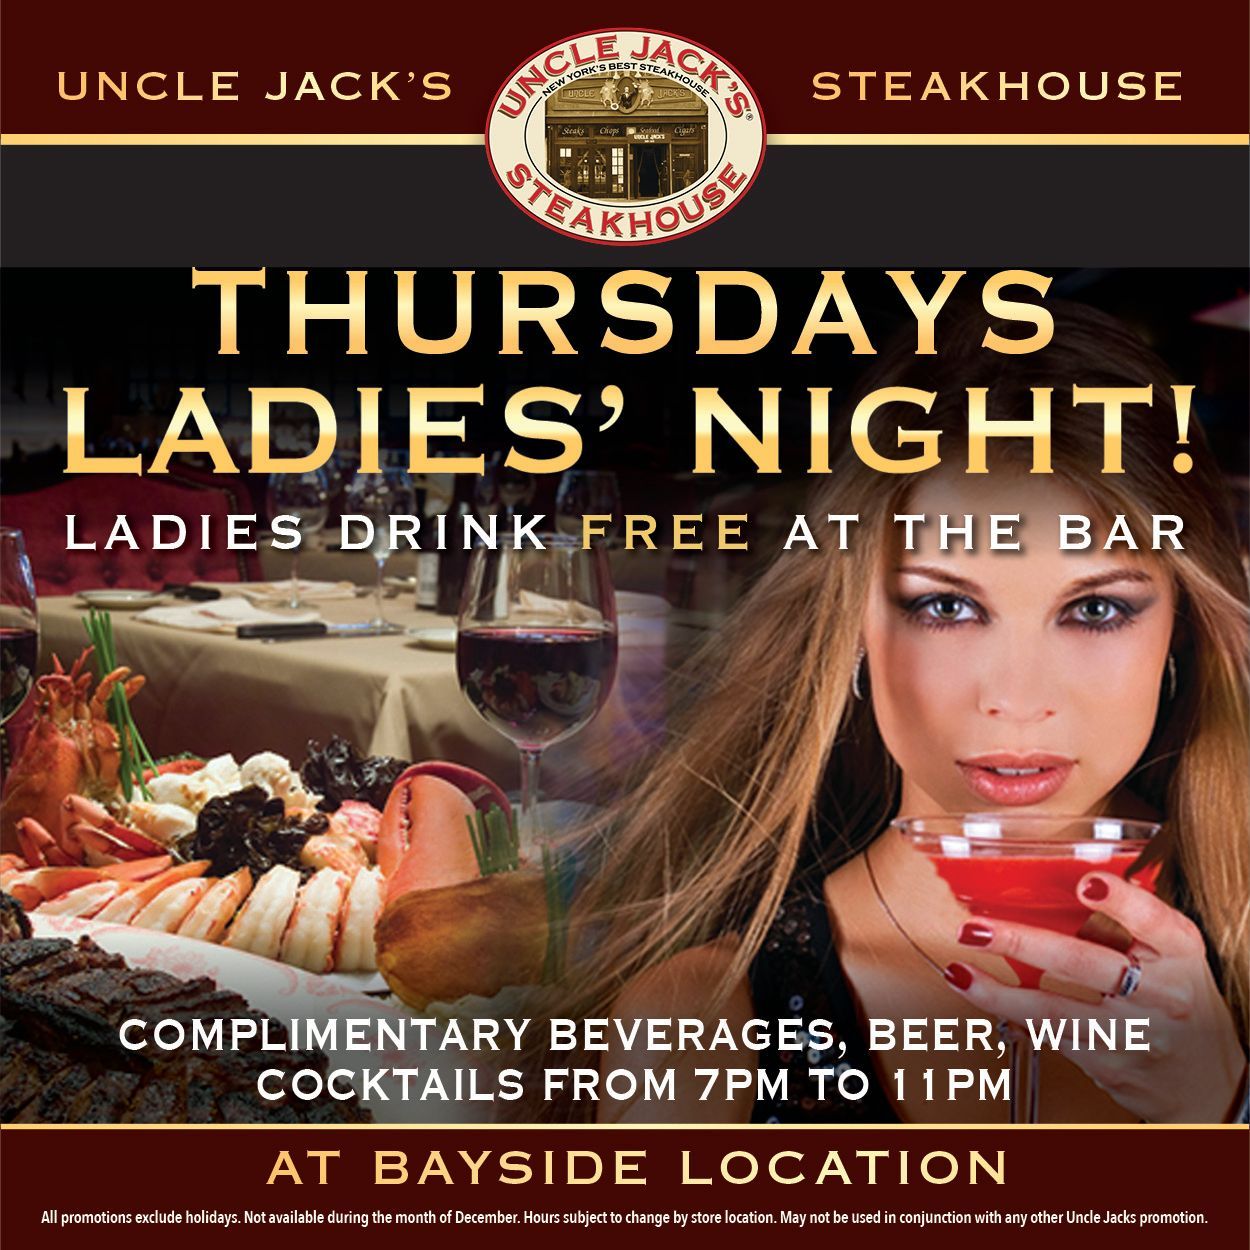 an advertisement for uncle jack 's steakhouse advertises thursdays ladies ' night